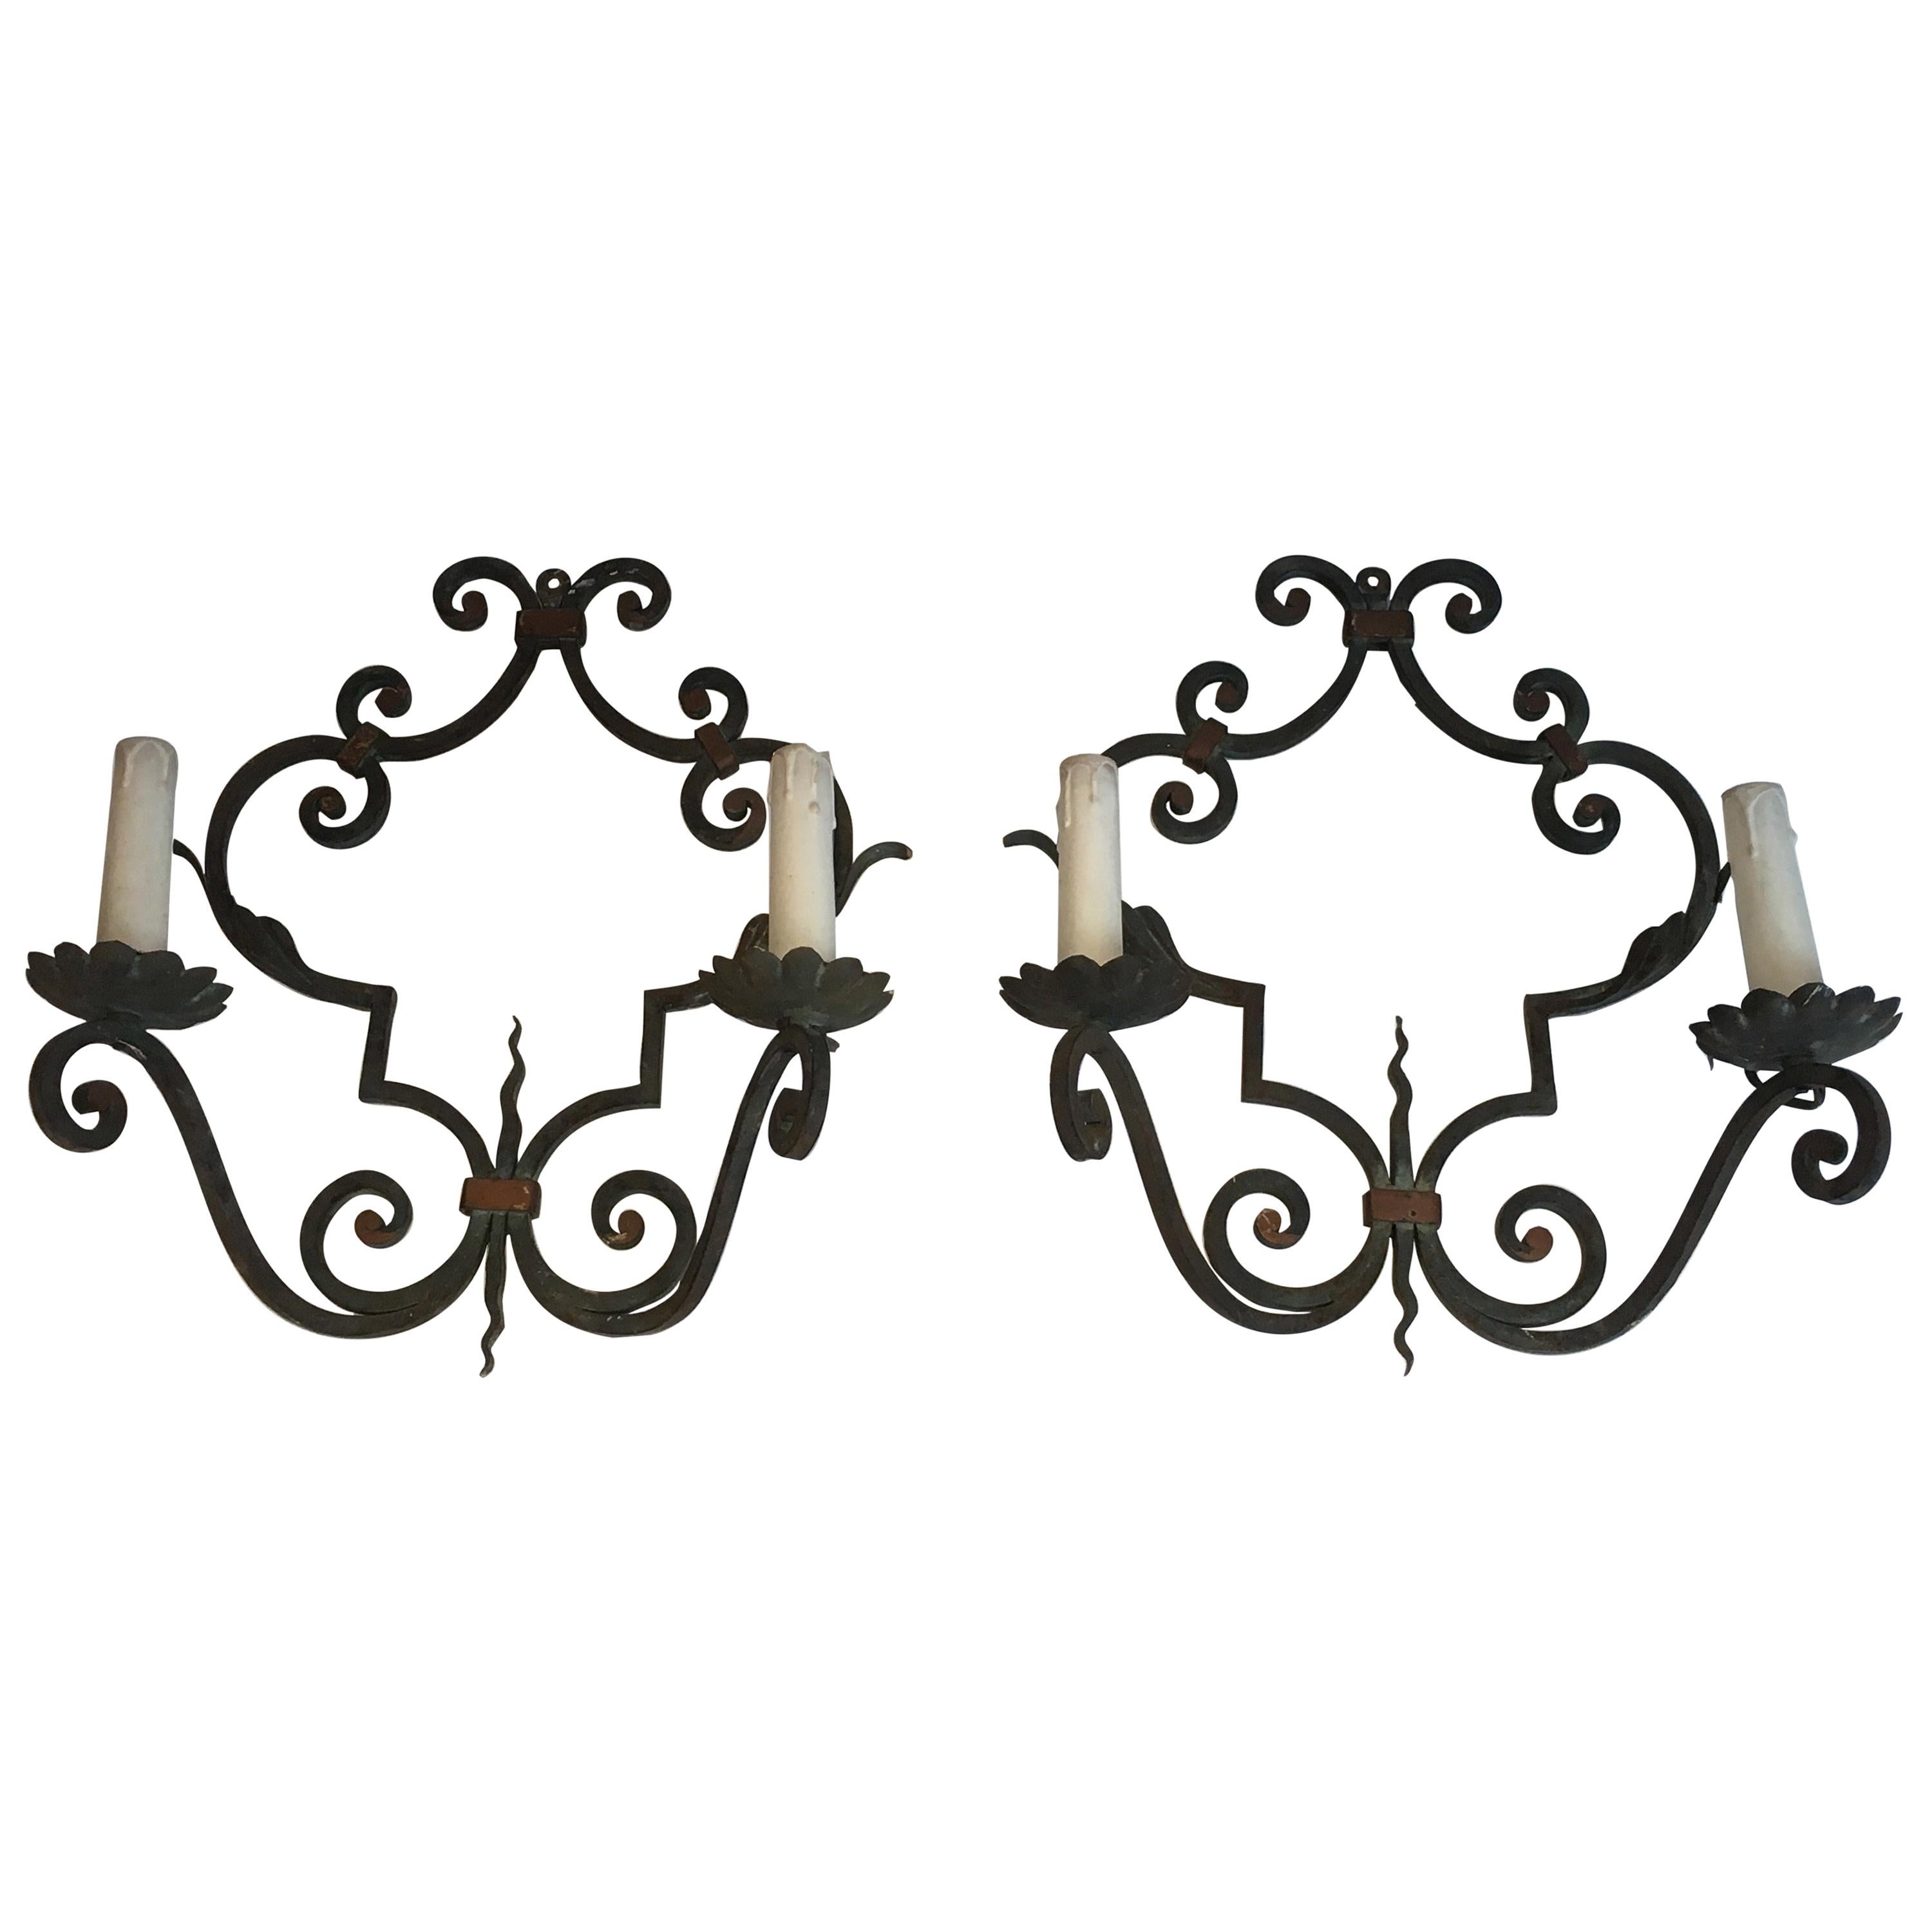 Pair of Large Decorative Wrought Iron Wall Sconces, French, circa 1950 For Sale